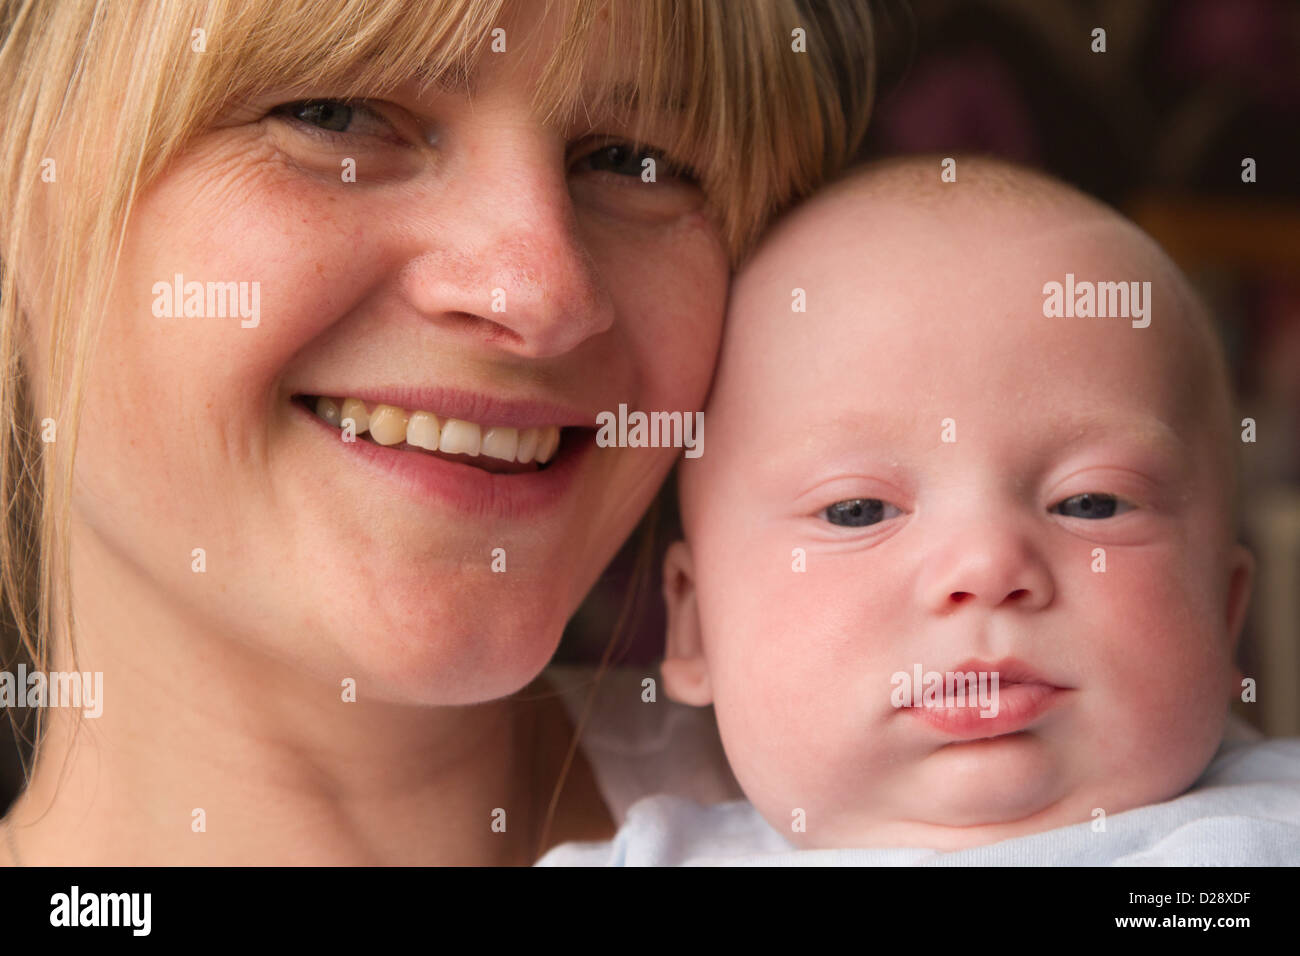 Mother holding baby. Stock Photo